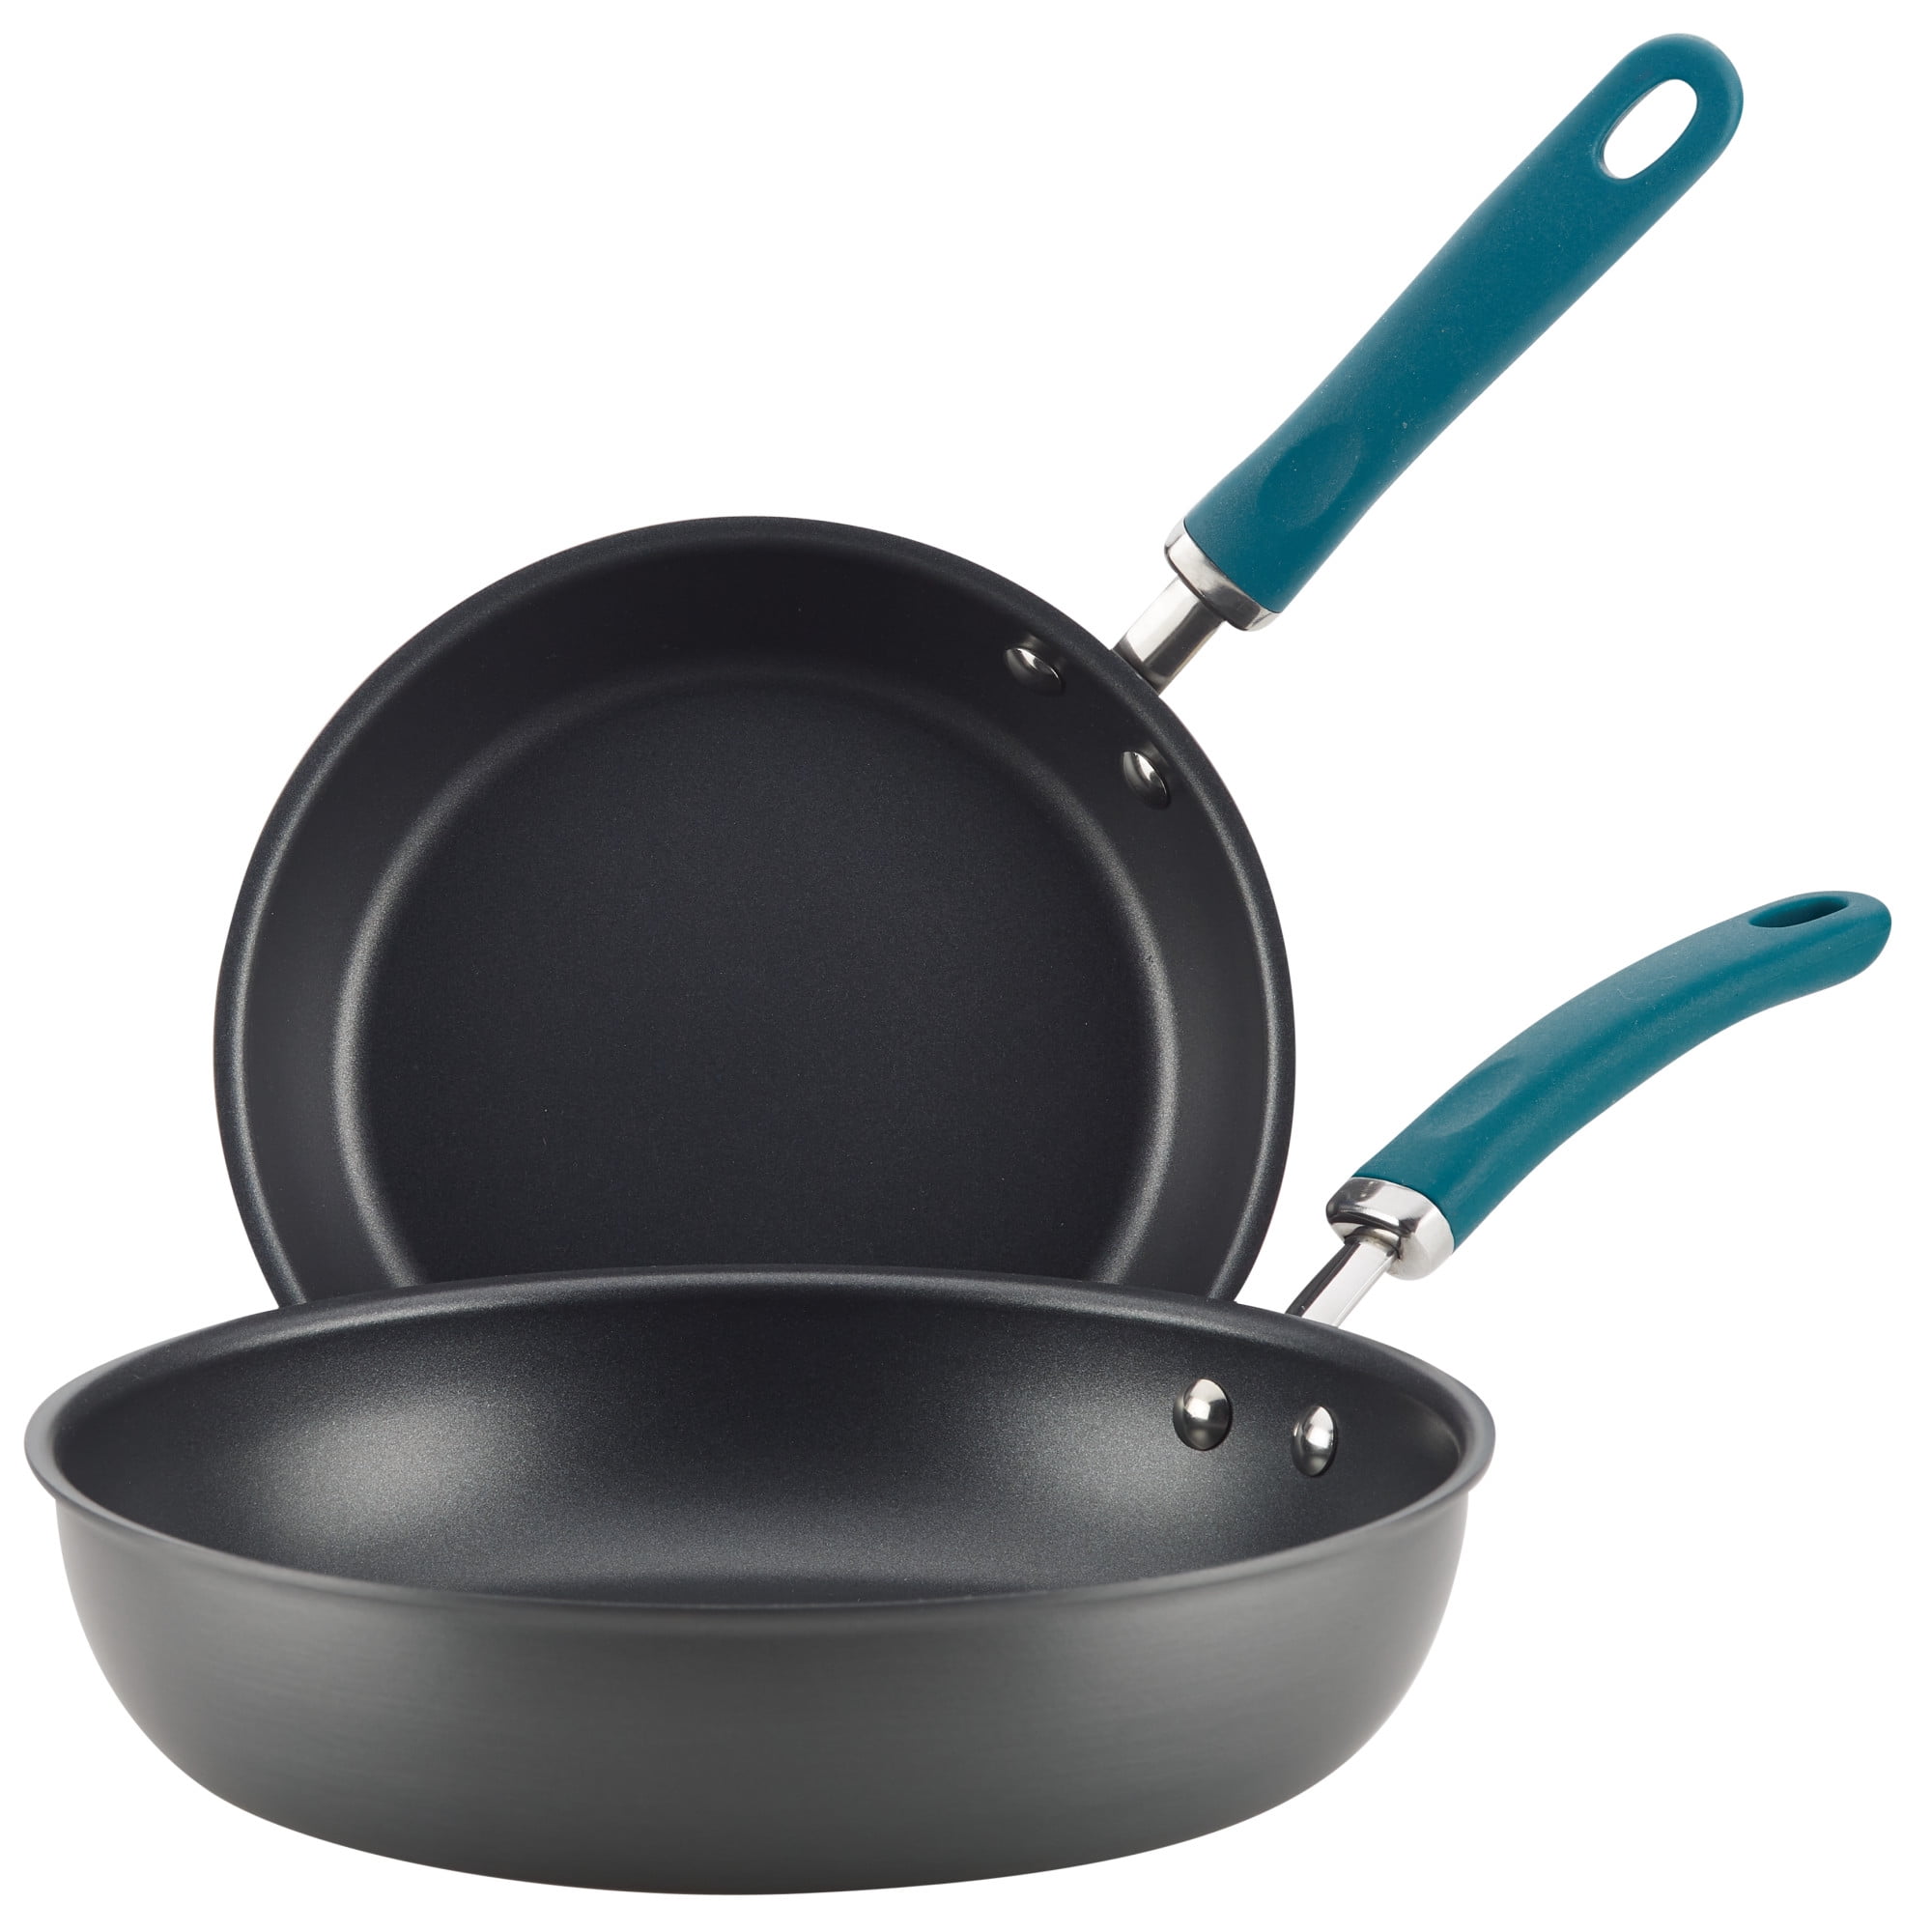 Rachael Ray Hard-Anodized Nonstick 14-inch Skillet with Helper Handle, Orange